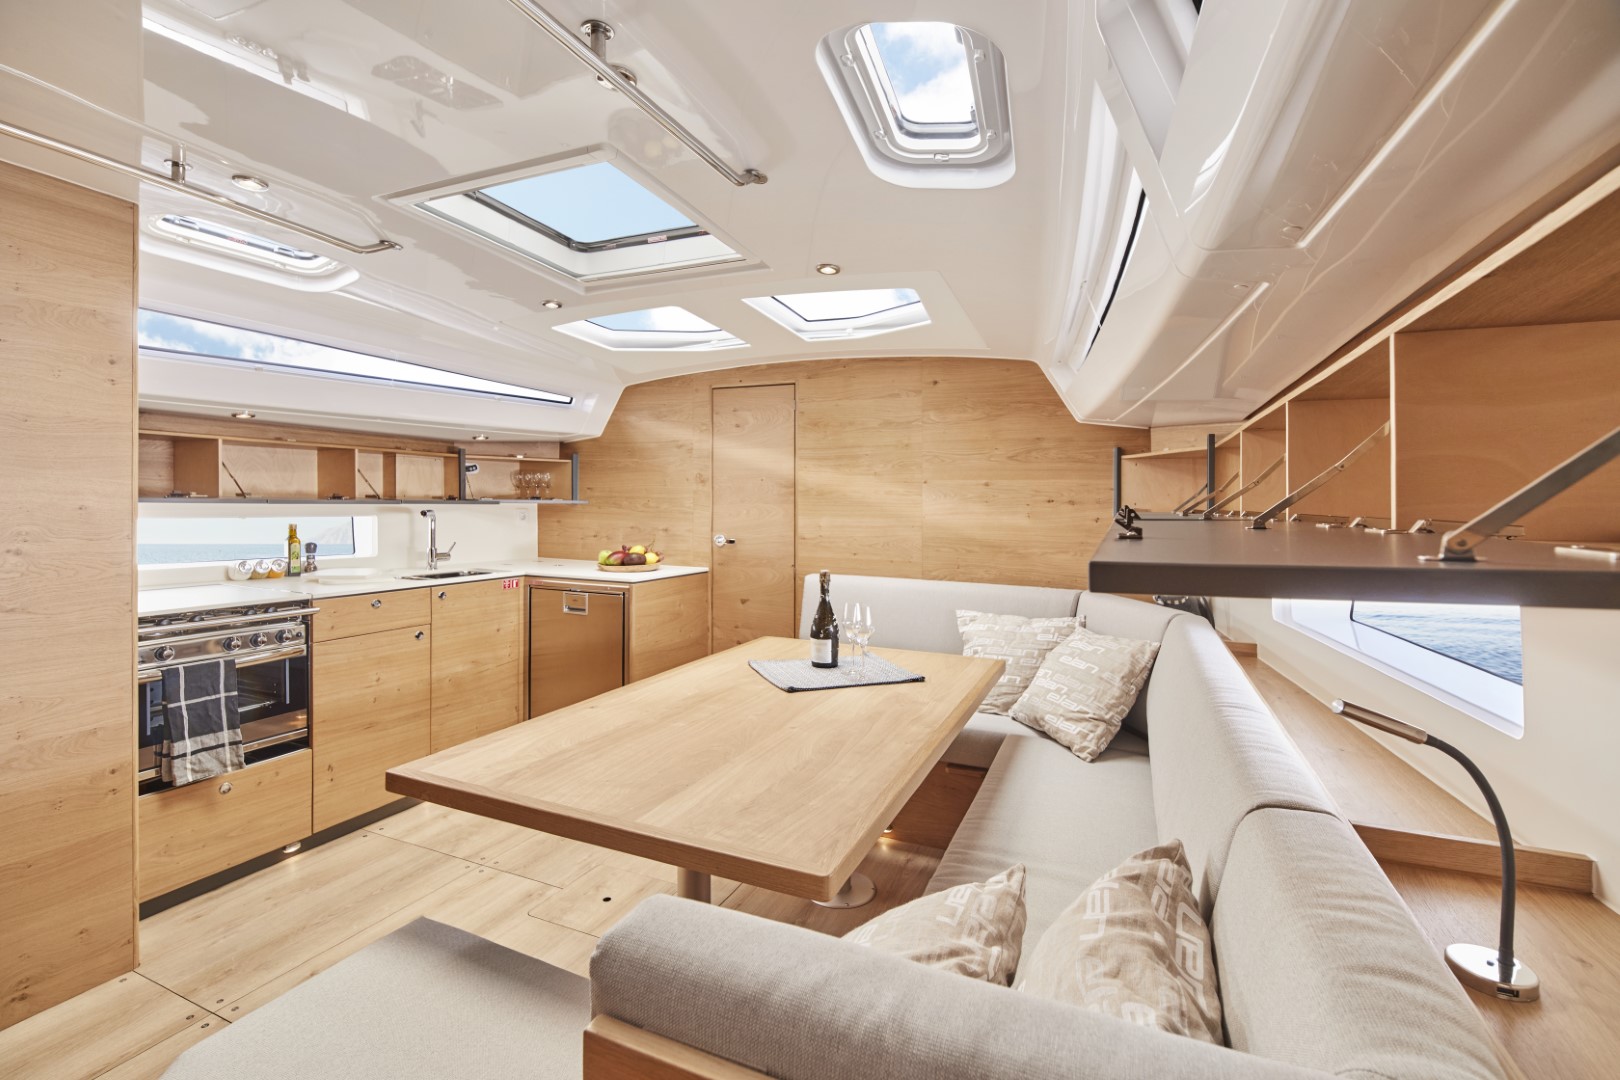 Elan Impression 43 - saloon with open cupboards